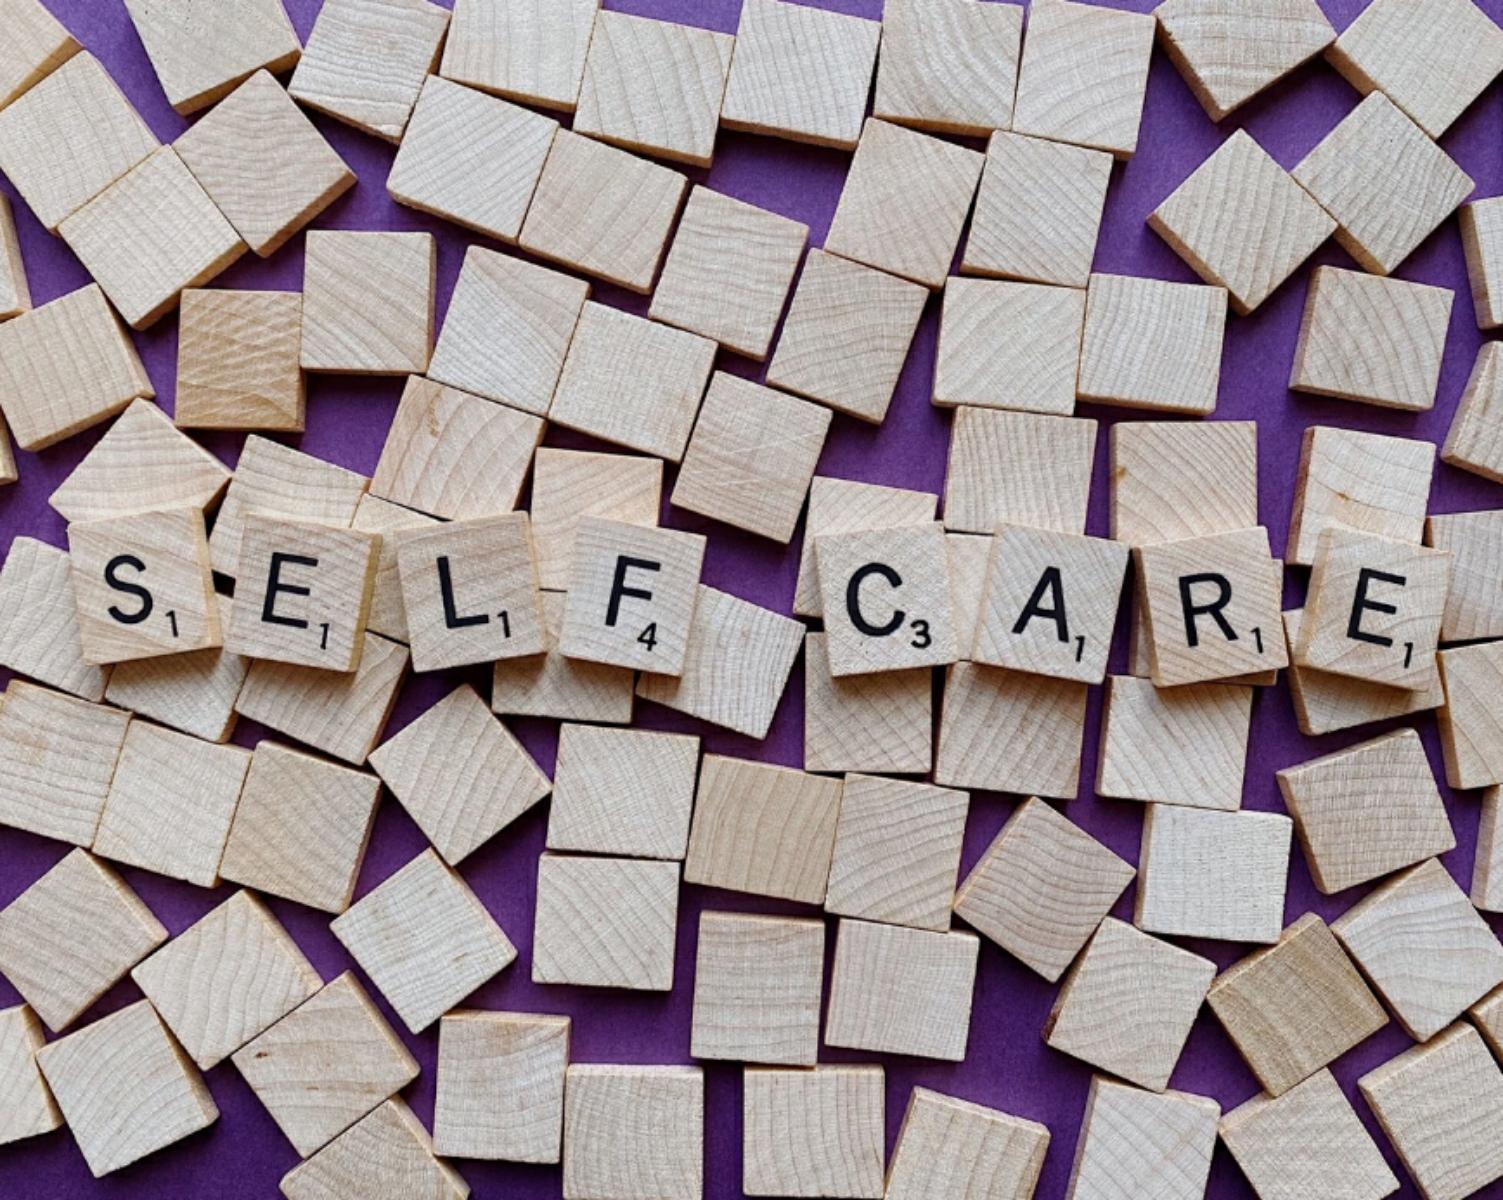 What Is self-care?